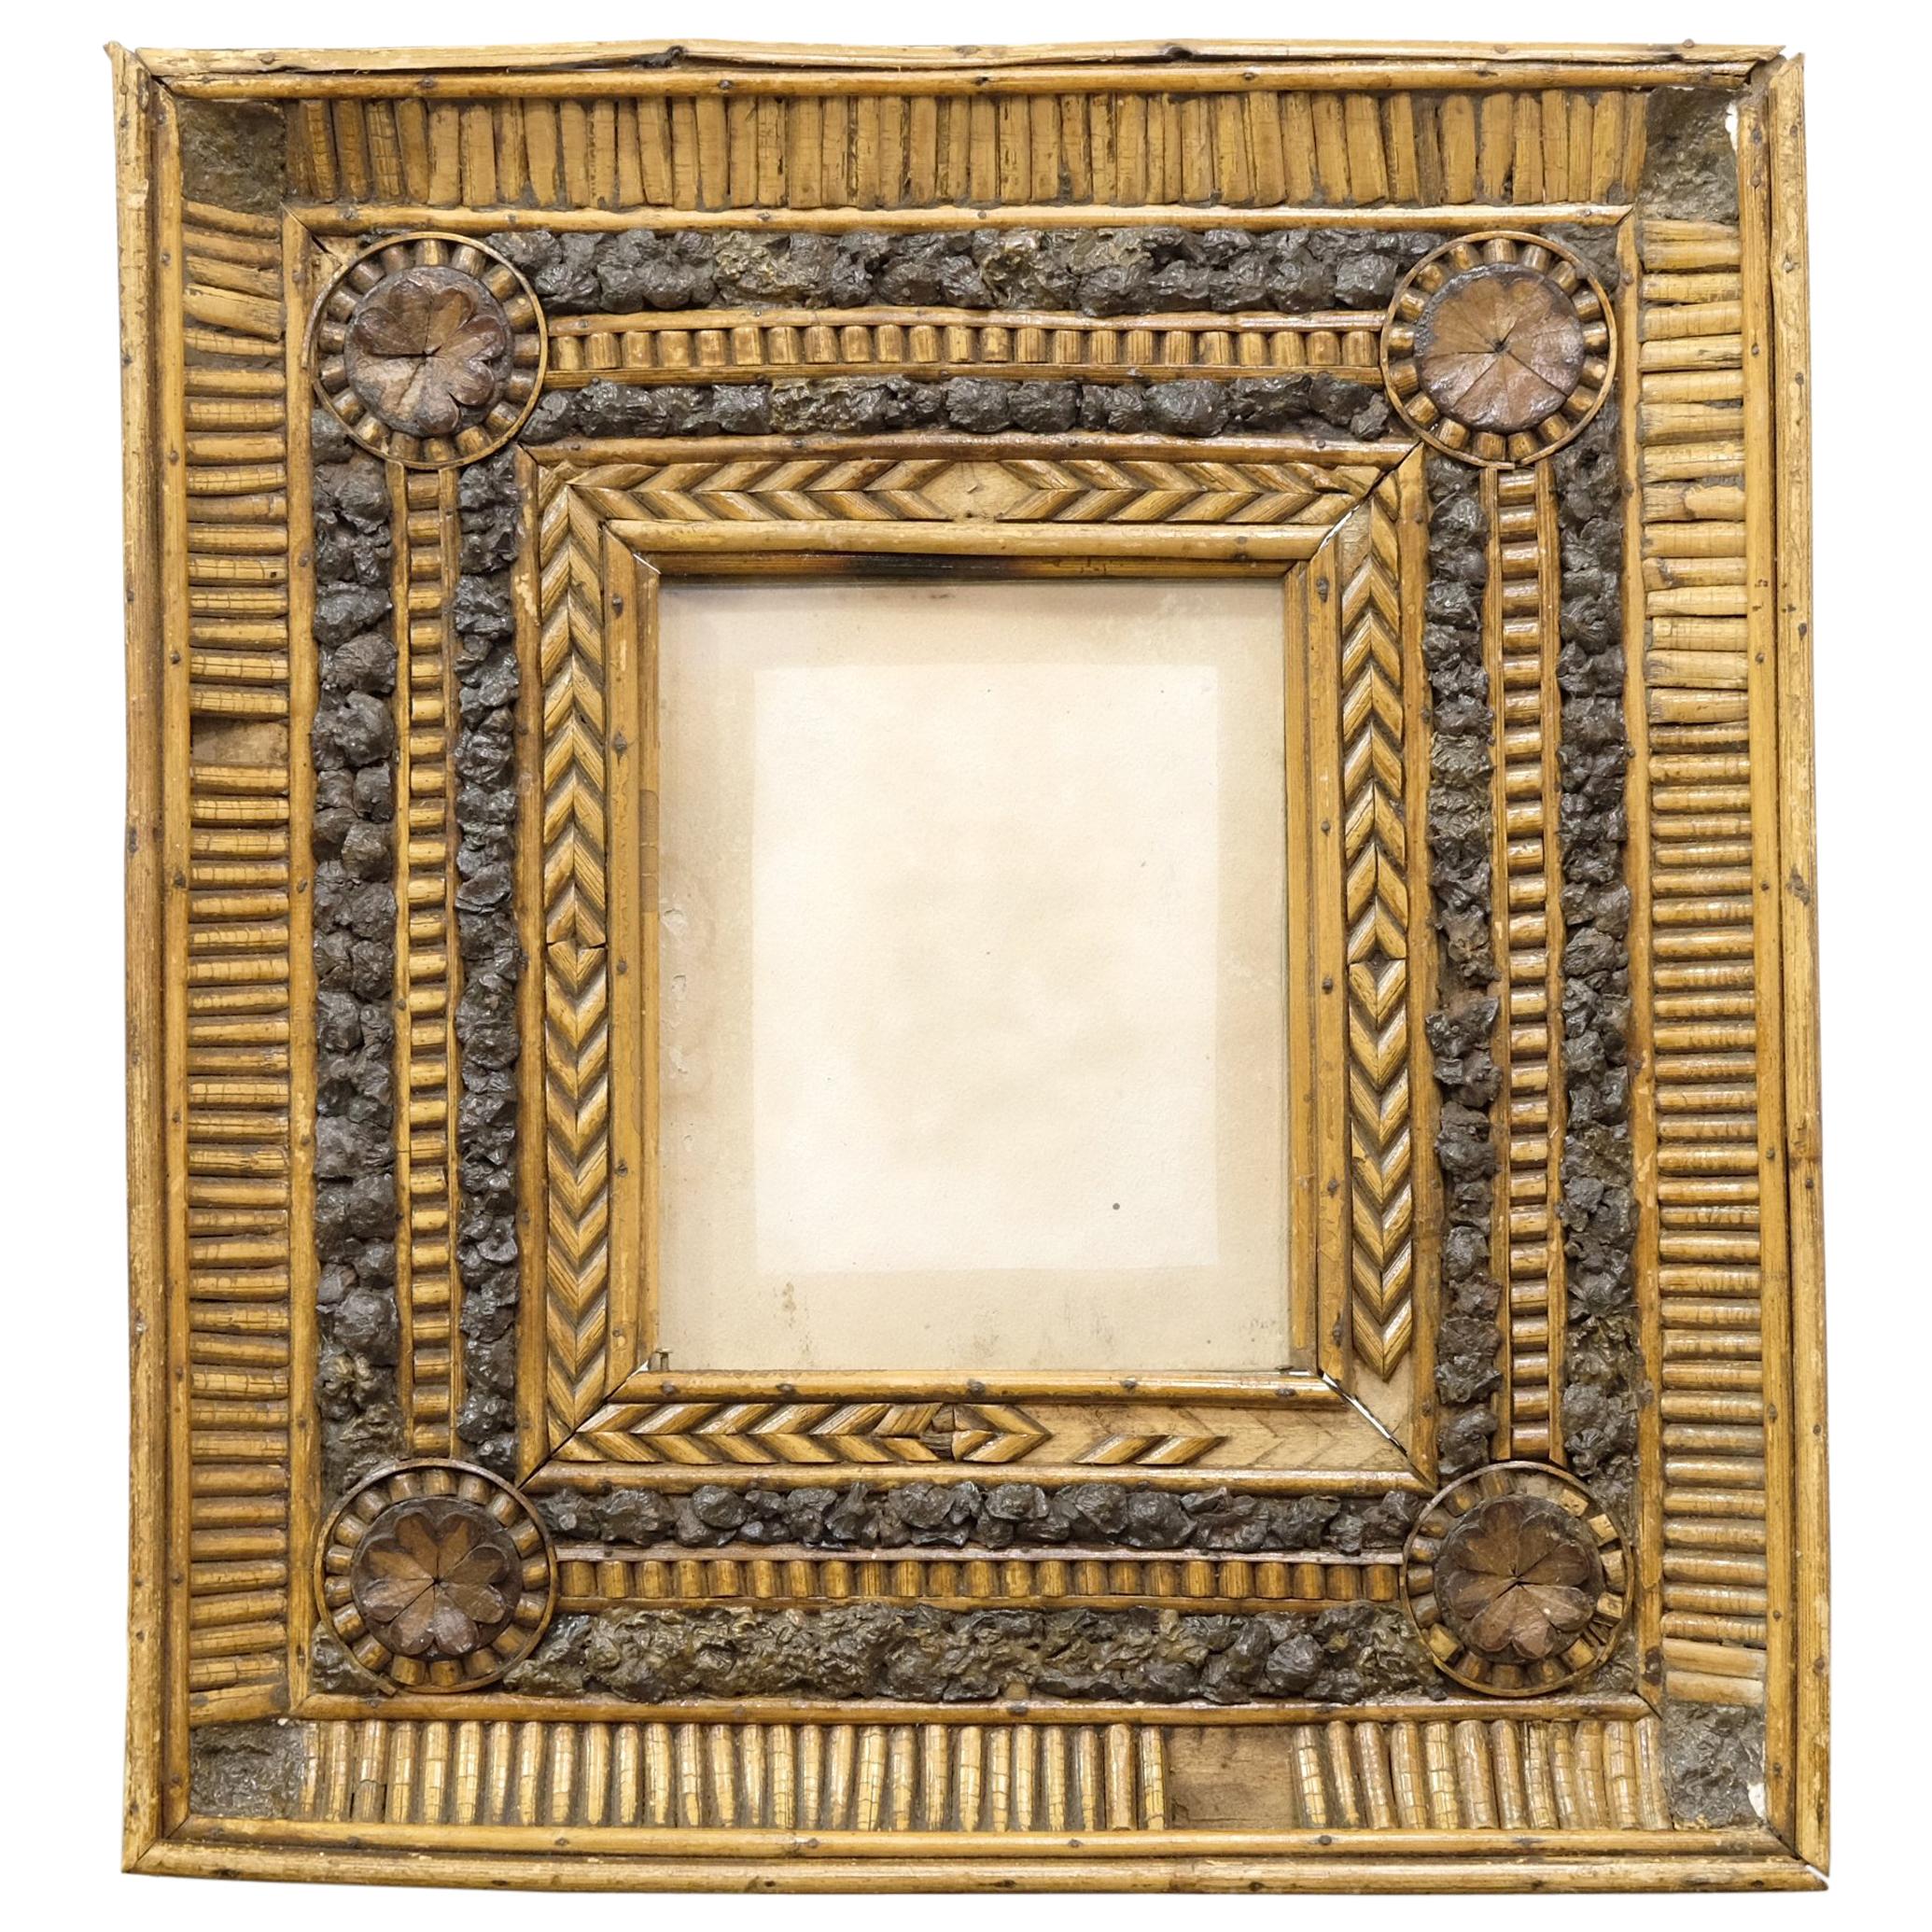 Folk Art Twig and Bark Applied Decorative Picture Frame, 19th Century